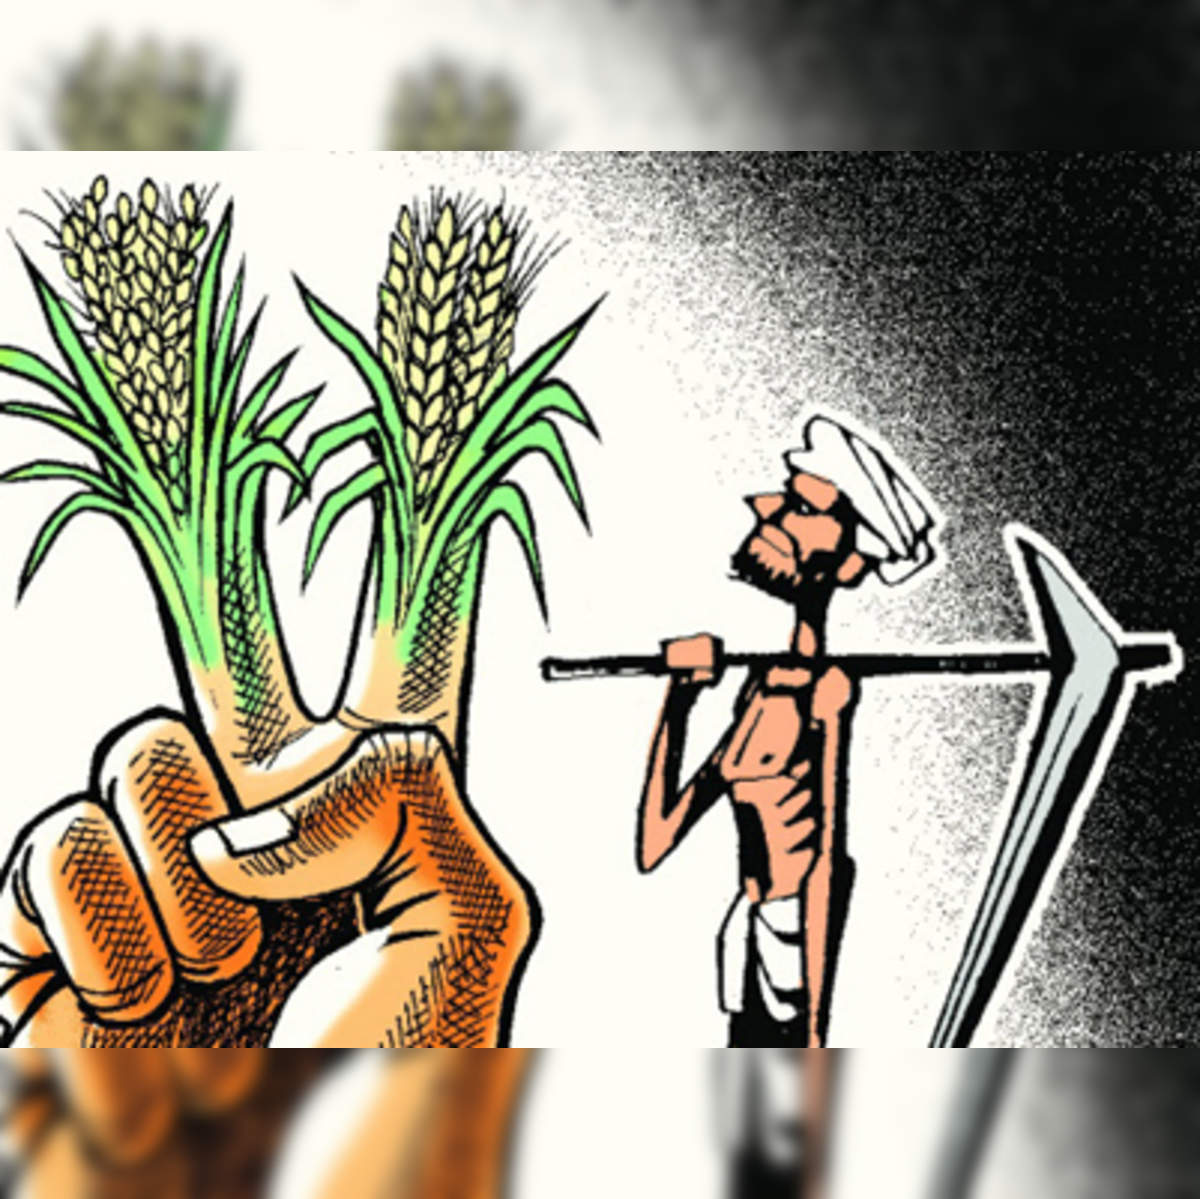 UPA government: Implementing food security law to cost government Rs 88,500  crore - The Economic Times